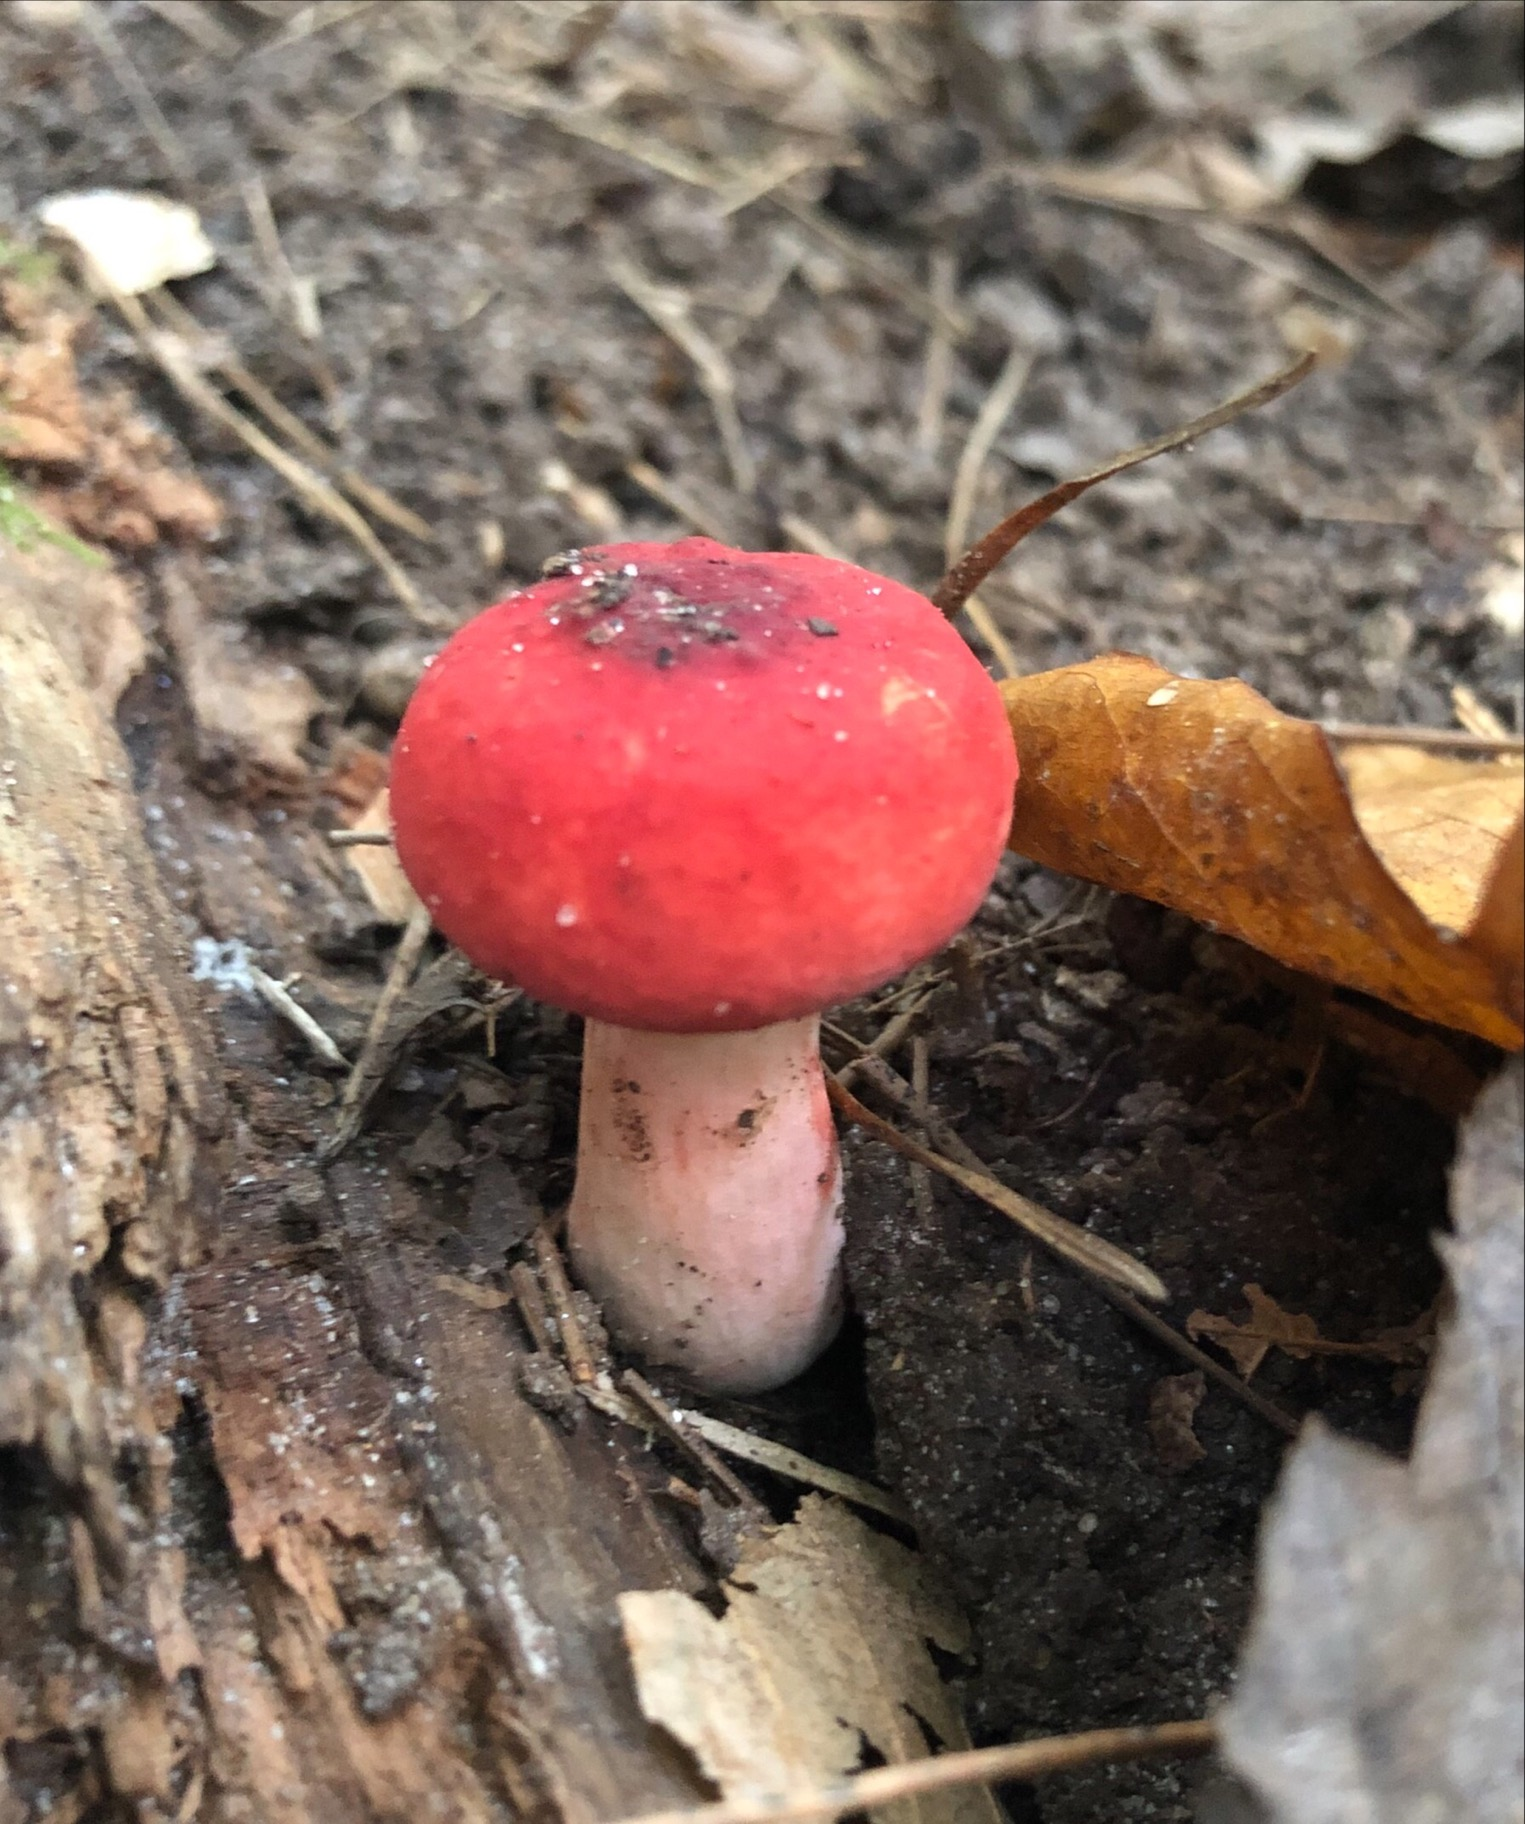 Mushroom with a red top.